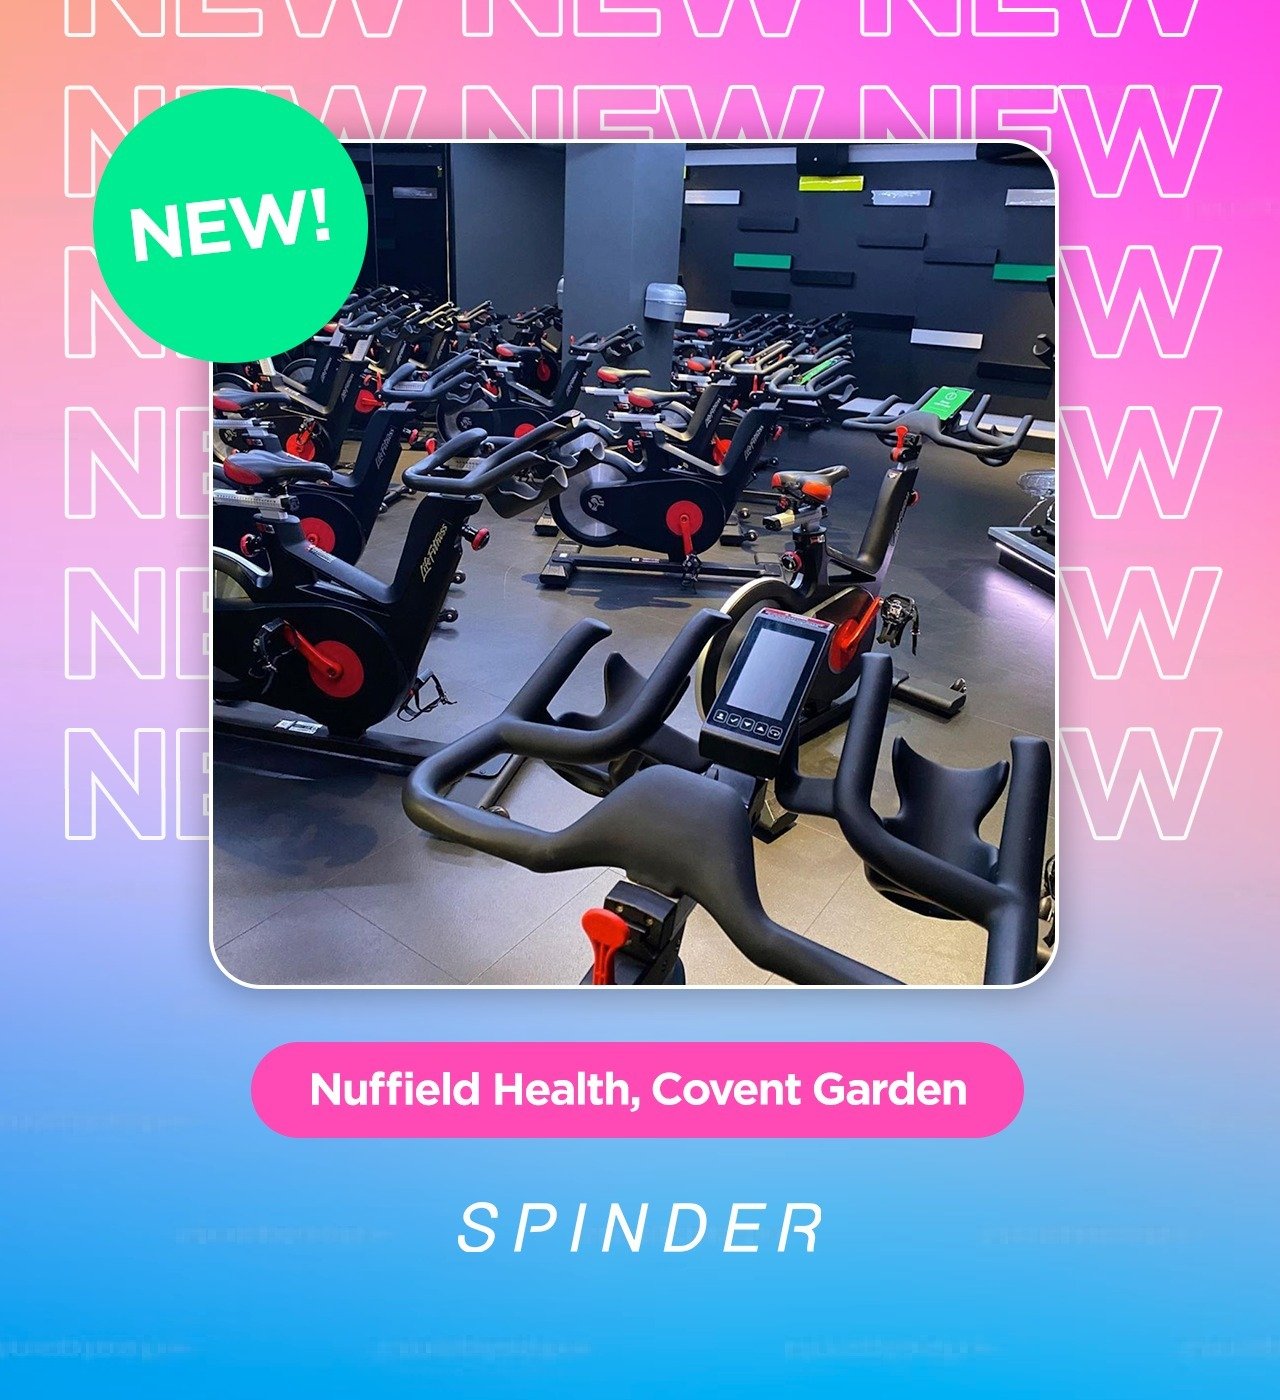 👏 EXCITING NEWS! 🎉 We have a new gym location joining the Spinder family, @nuffieldhealthcoventgarden! 
 
Look at our May timetable for classes at this fab venue - plus our other brilliant spots across London. Check your booking email, and website,